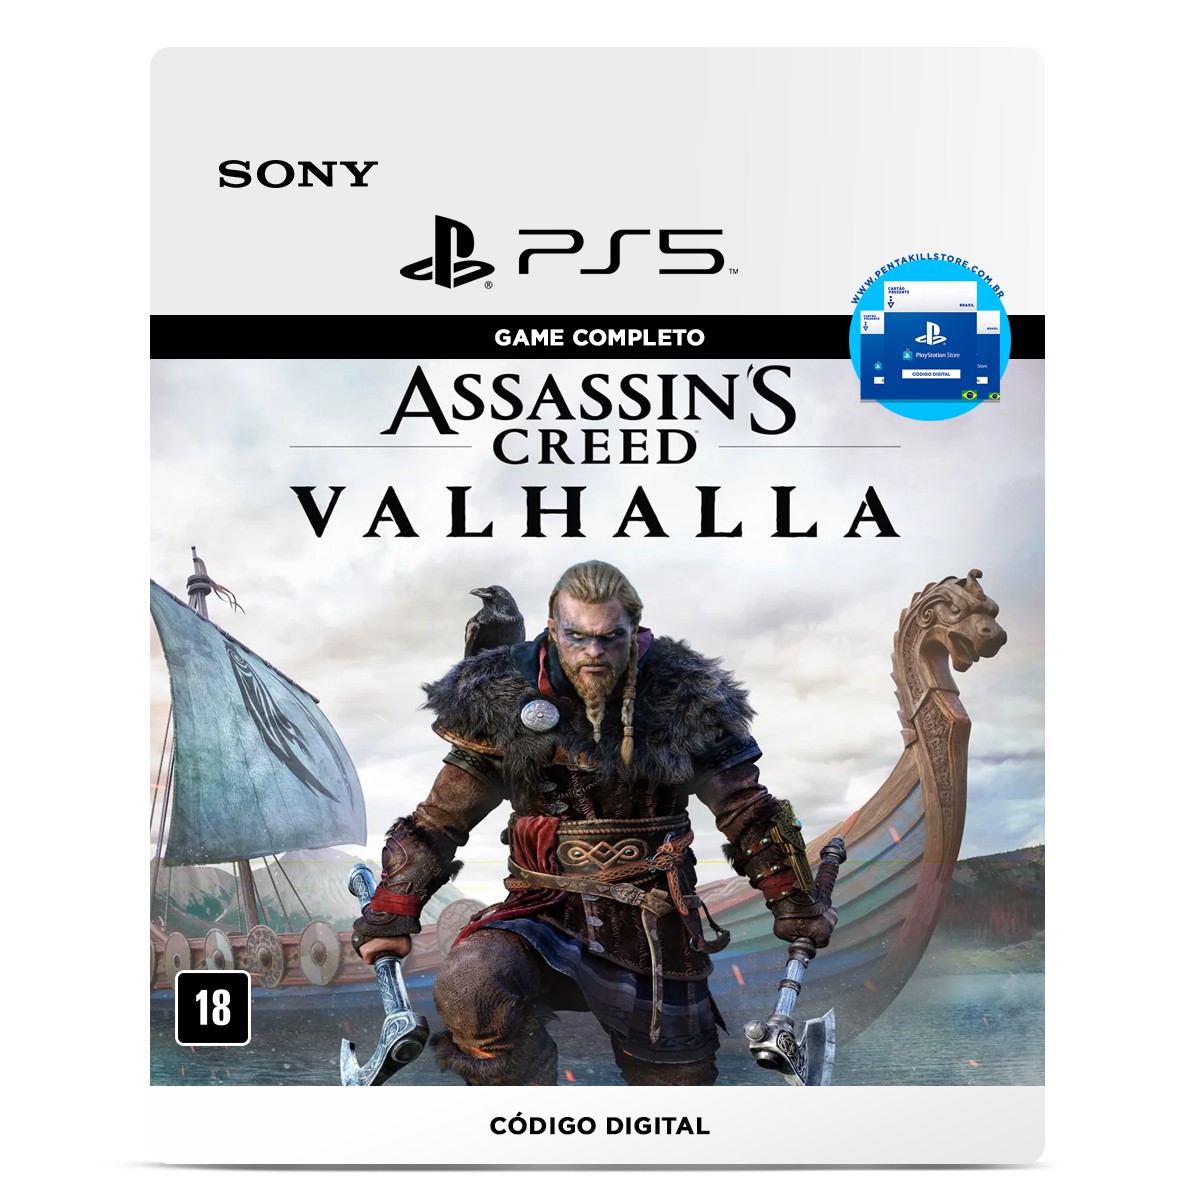 Assassin's Creed Valhalla Deluxe edition - Ps4 e Ps5 Digital